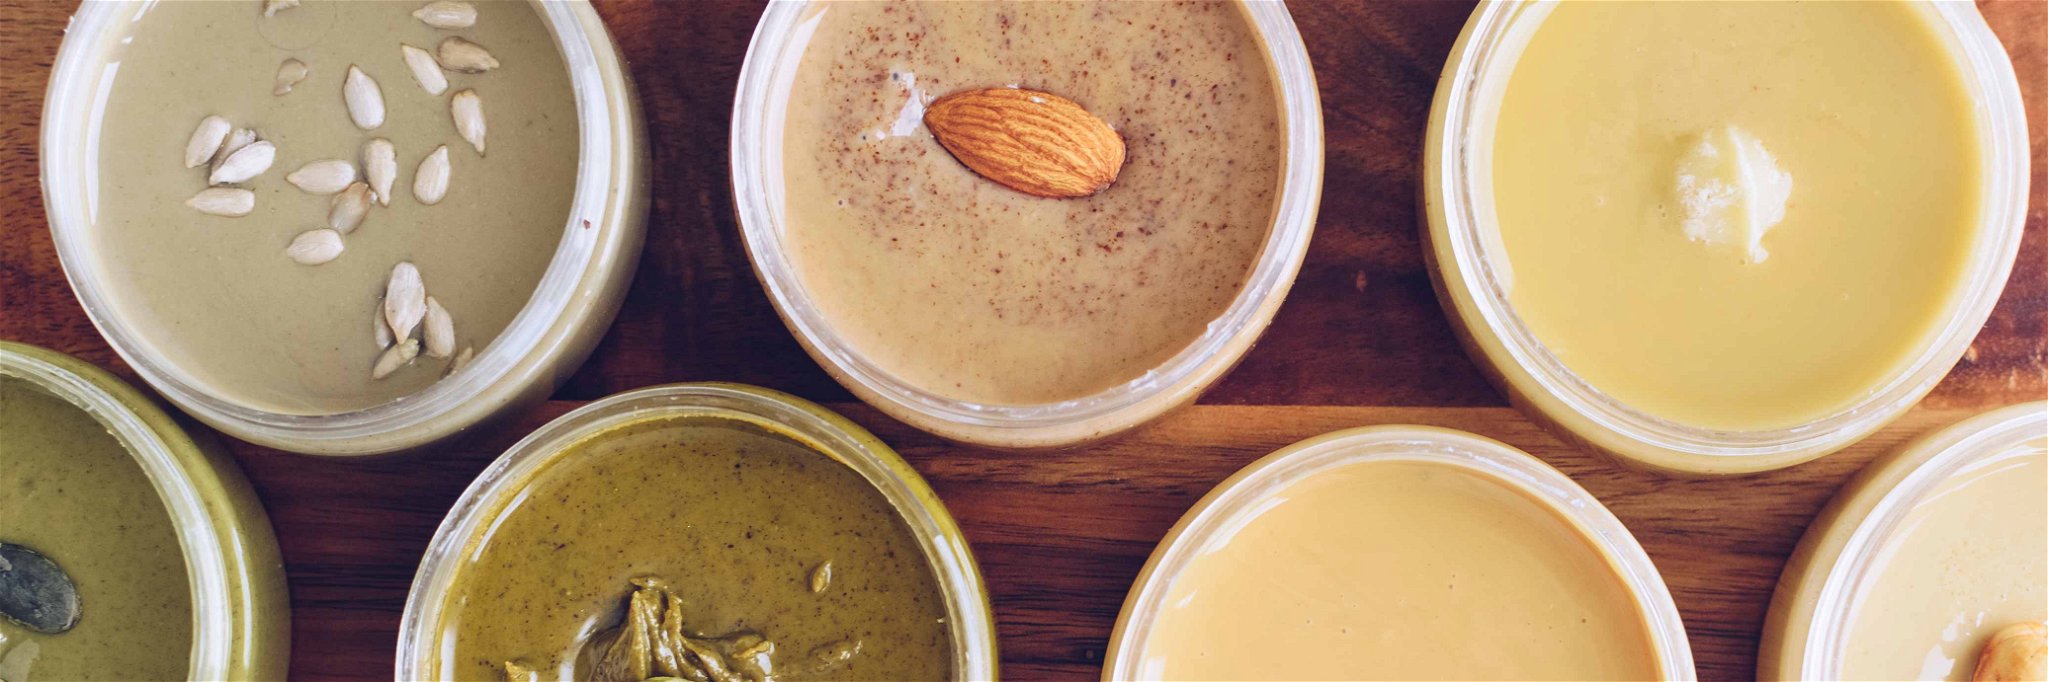 There are countless varieties of nut butter from&nbsp;pistachios to&nbsp;peanuts.